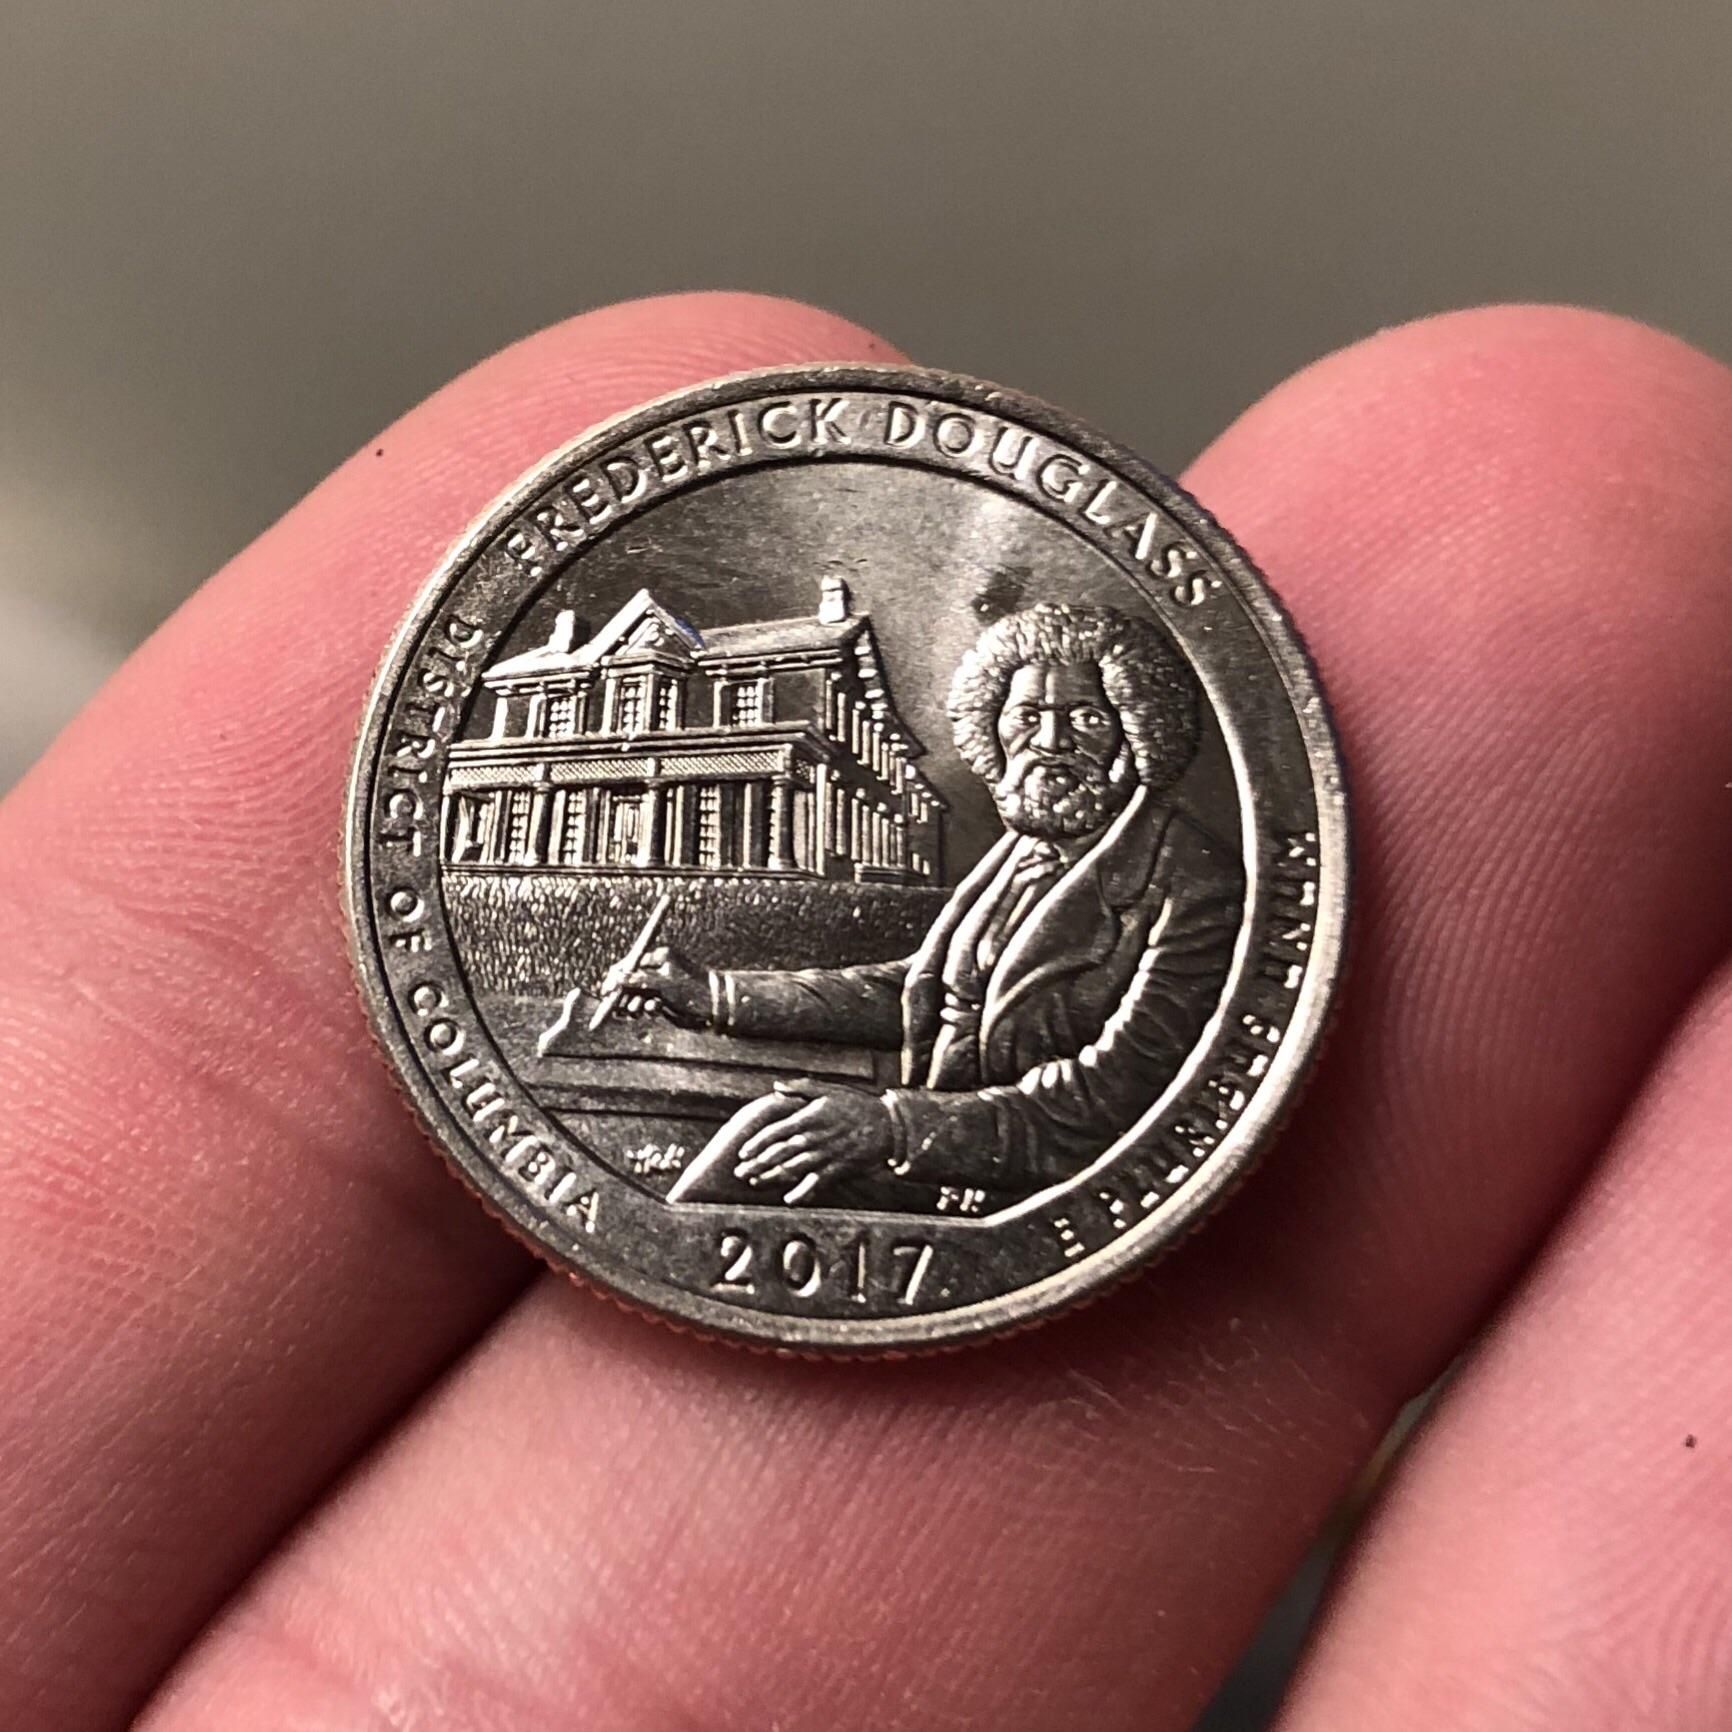 At first glance I thought this was a Bob Ross Quarter...